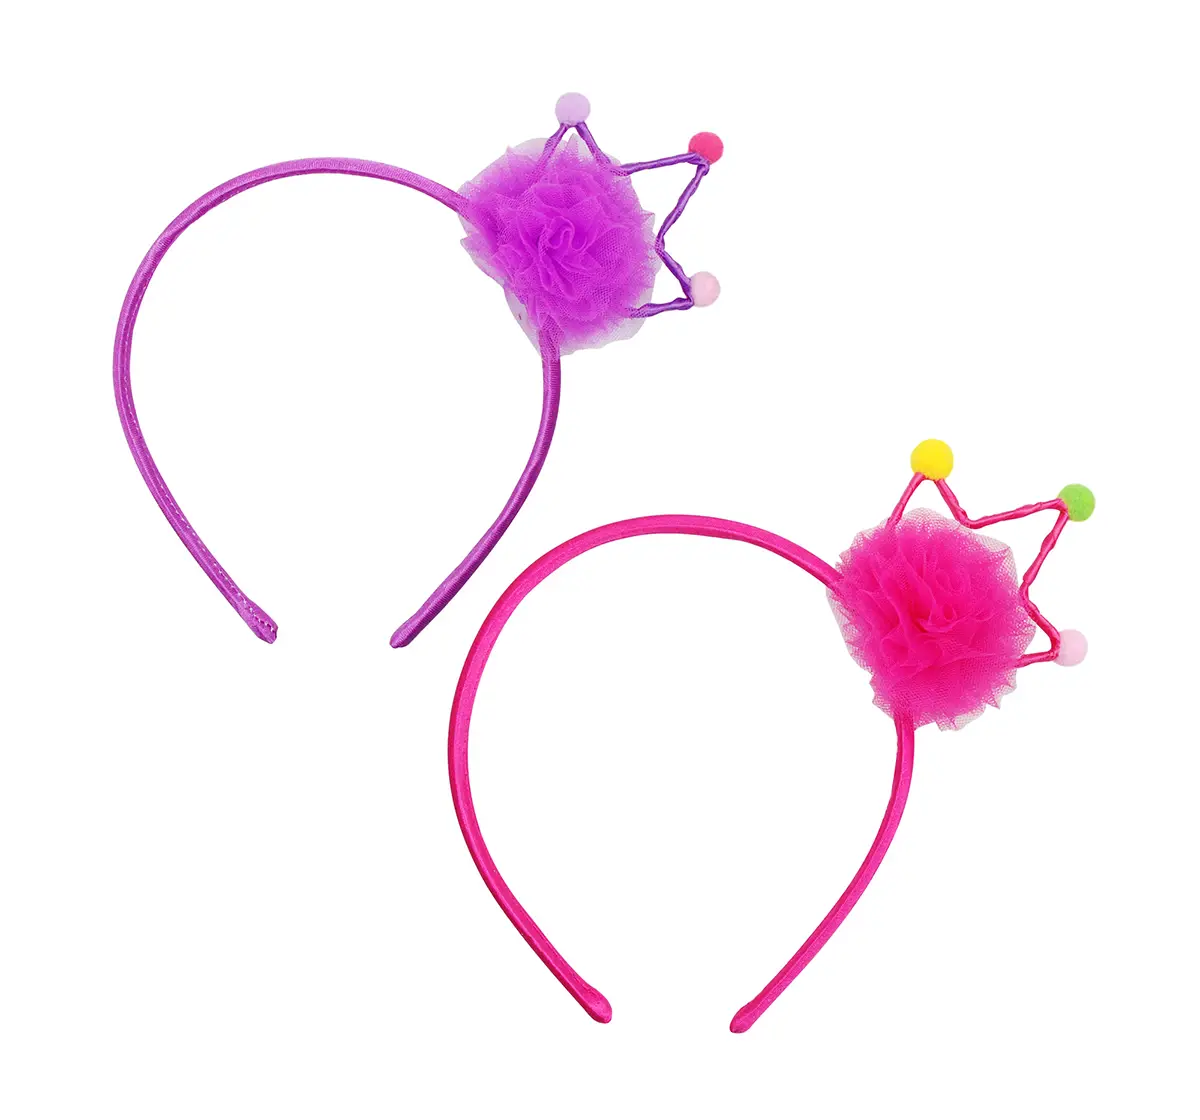 Luvley Party Pom Pom Crown Headband Assorted Girls Accessories age 3Y+ 